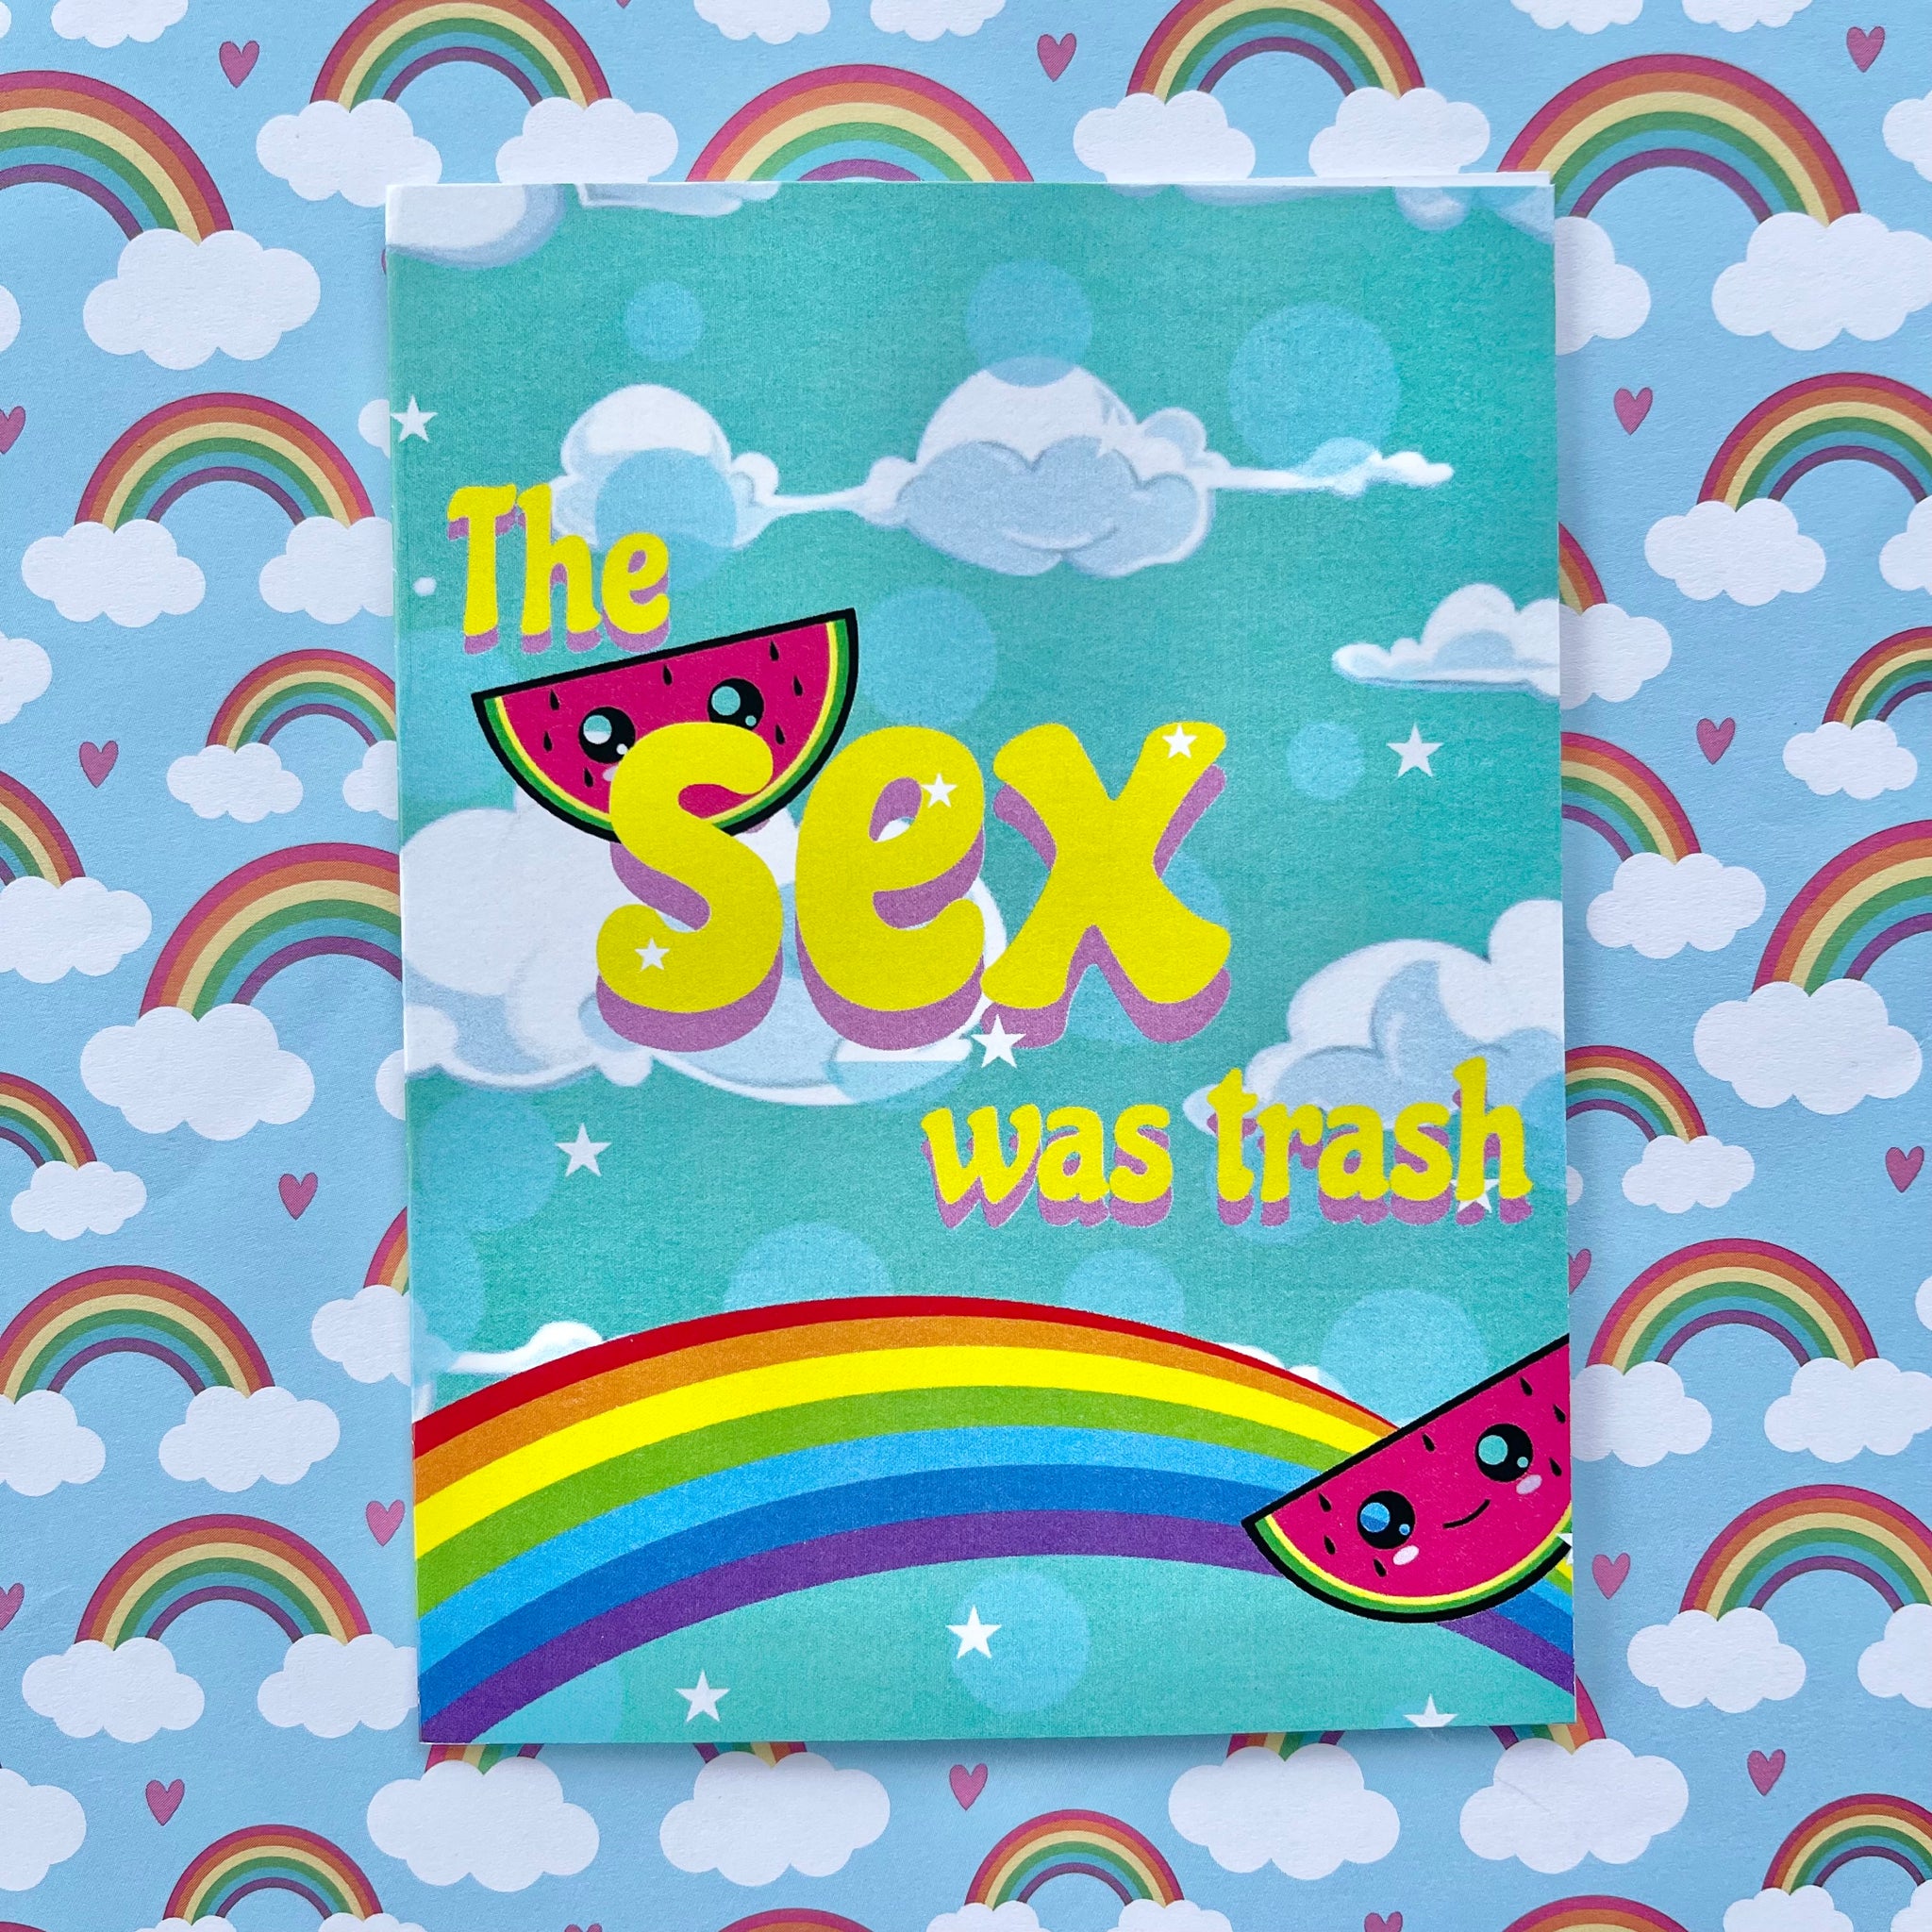 The Sex Was Trash Greeting Card